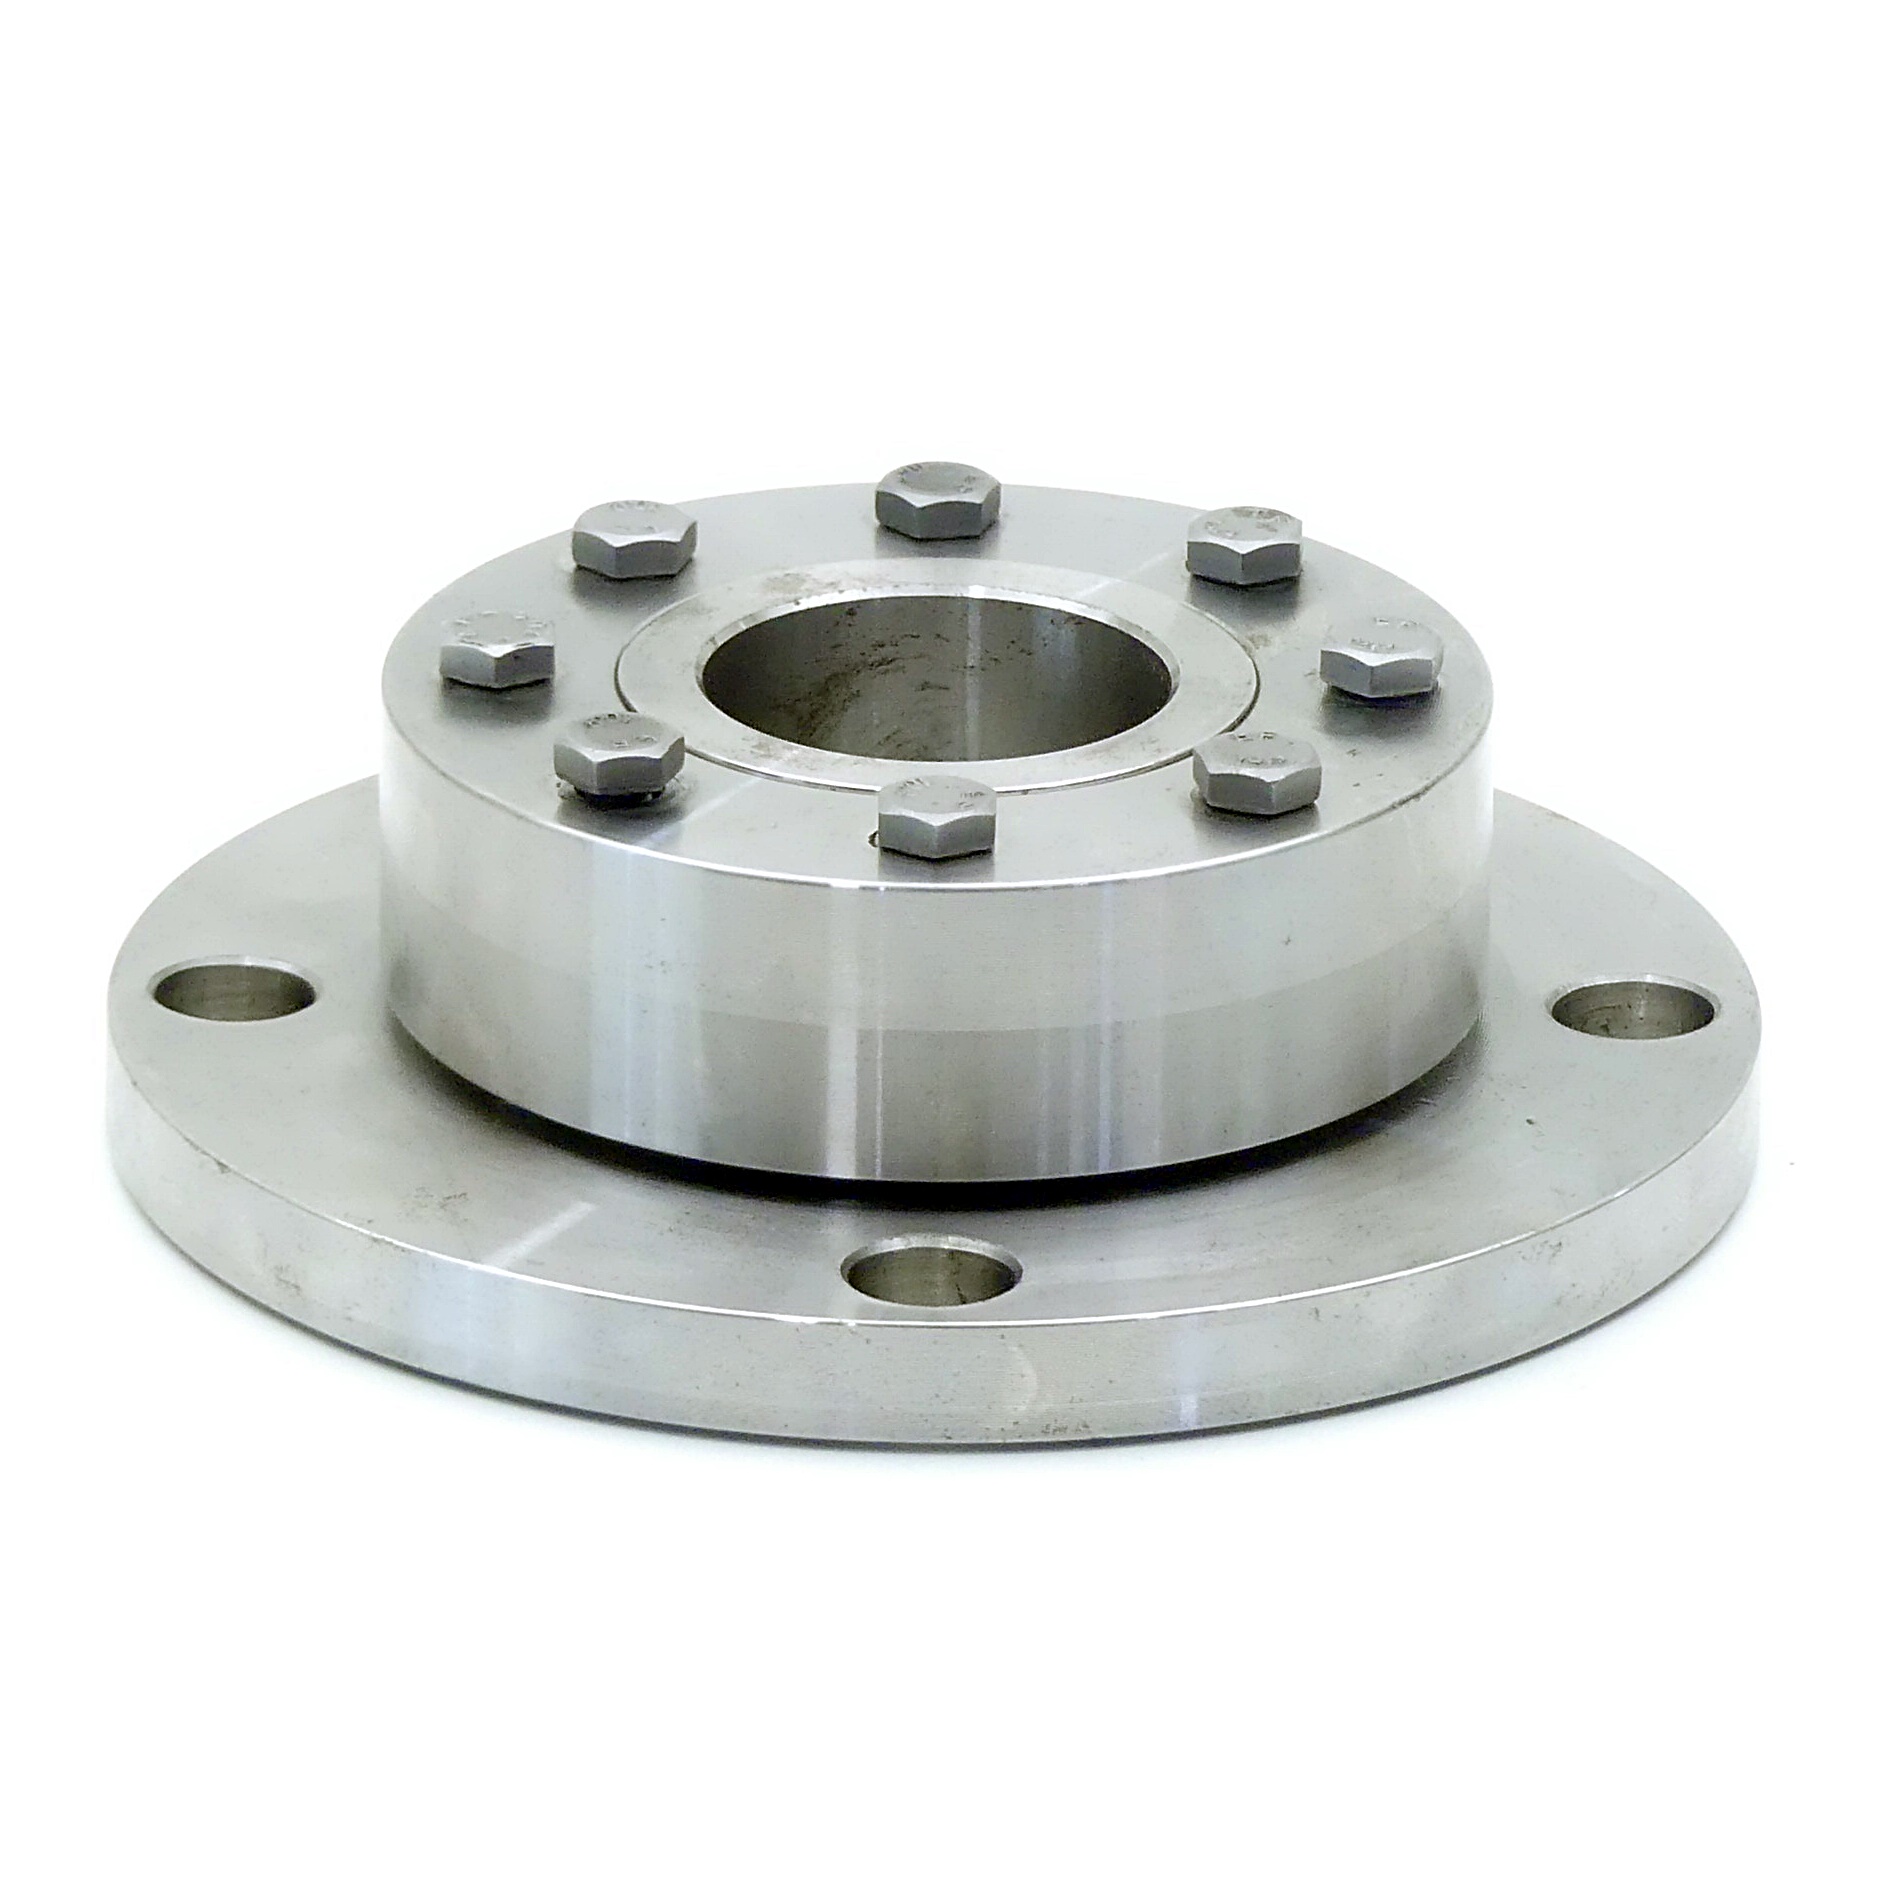 Clamping flange 21000370 